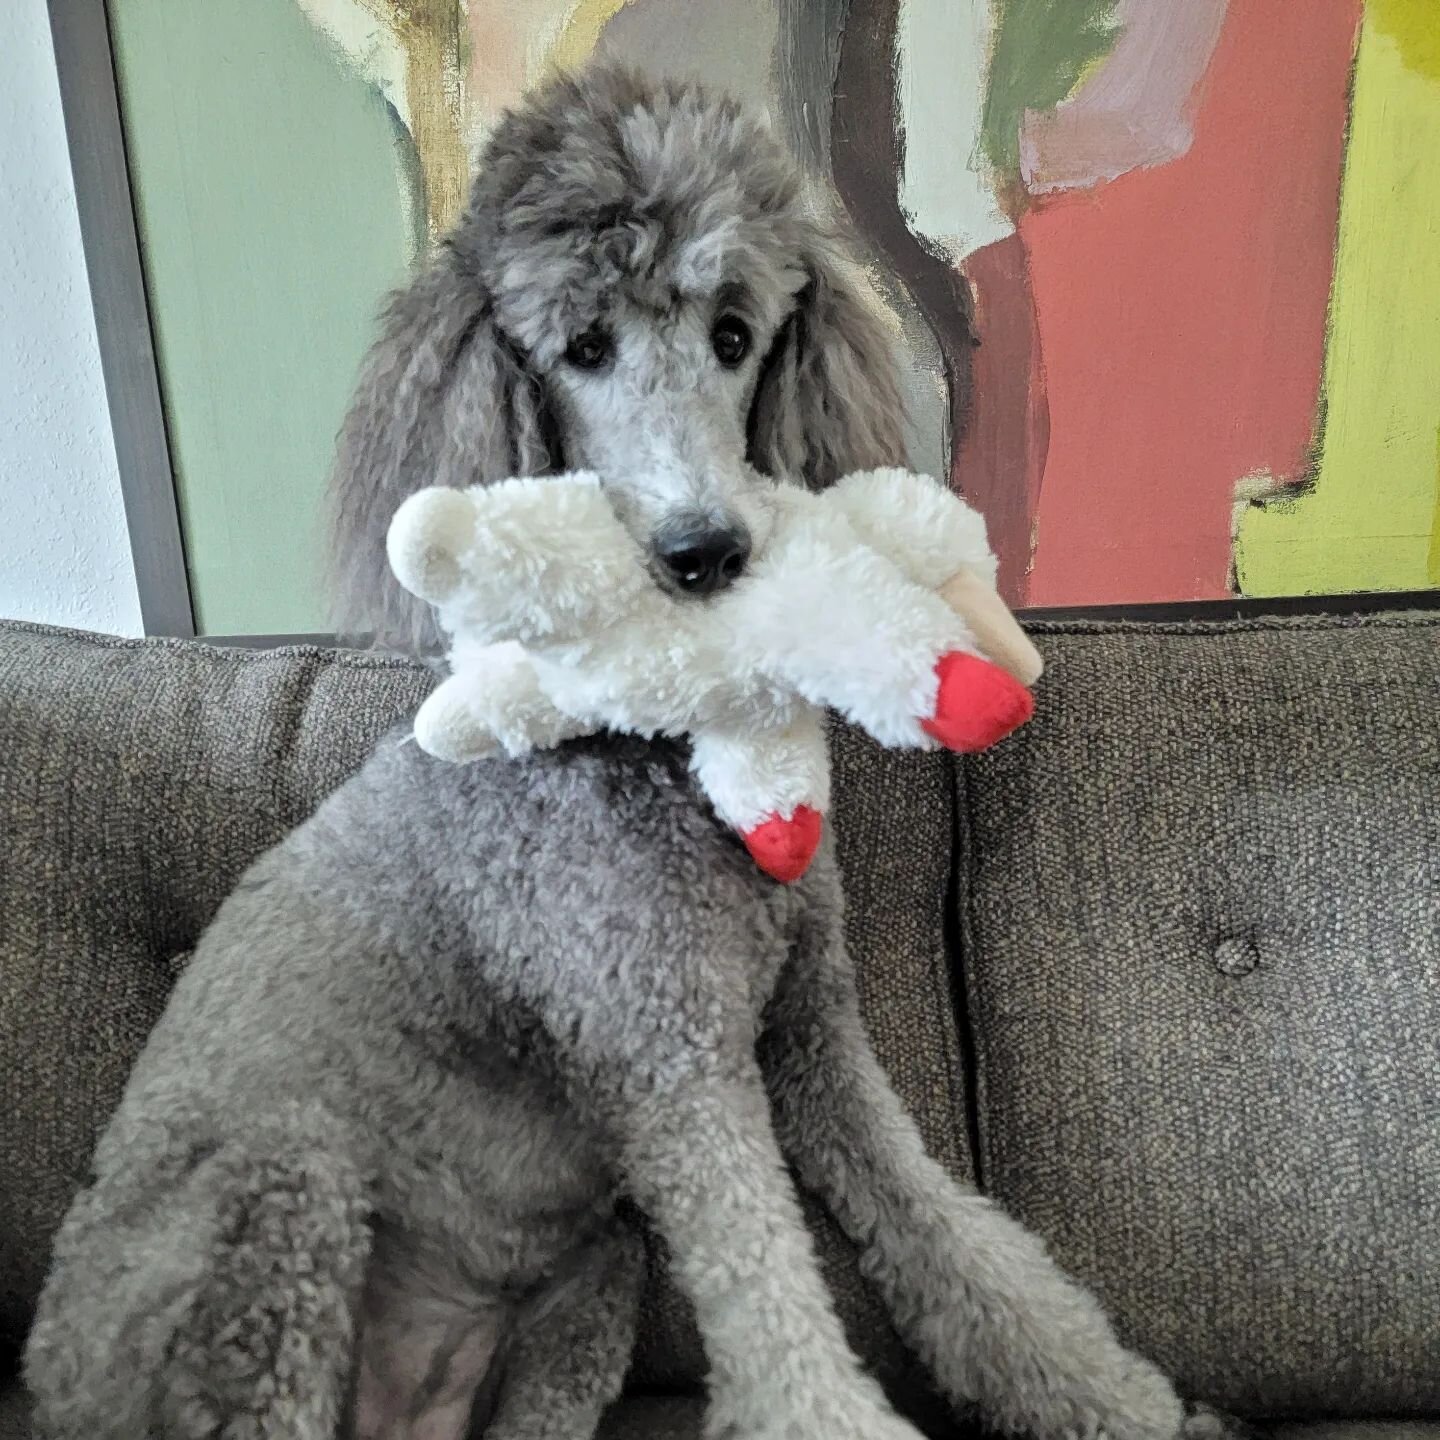 Sometimes you just wanna chill with your lamb on the couch and I'm ok with that too. 
.
.
.
.
.
#poodle #chloe 
#wegotstepsinfirst 
#saturdays 
.
.
.
.
.
#pitterpatterpaws3 #p3 #stpetefl #dogwalking #petsitting #smallbusiness #blackowned #morethanjus